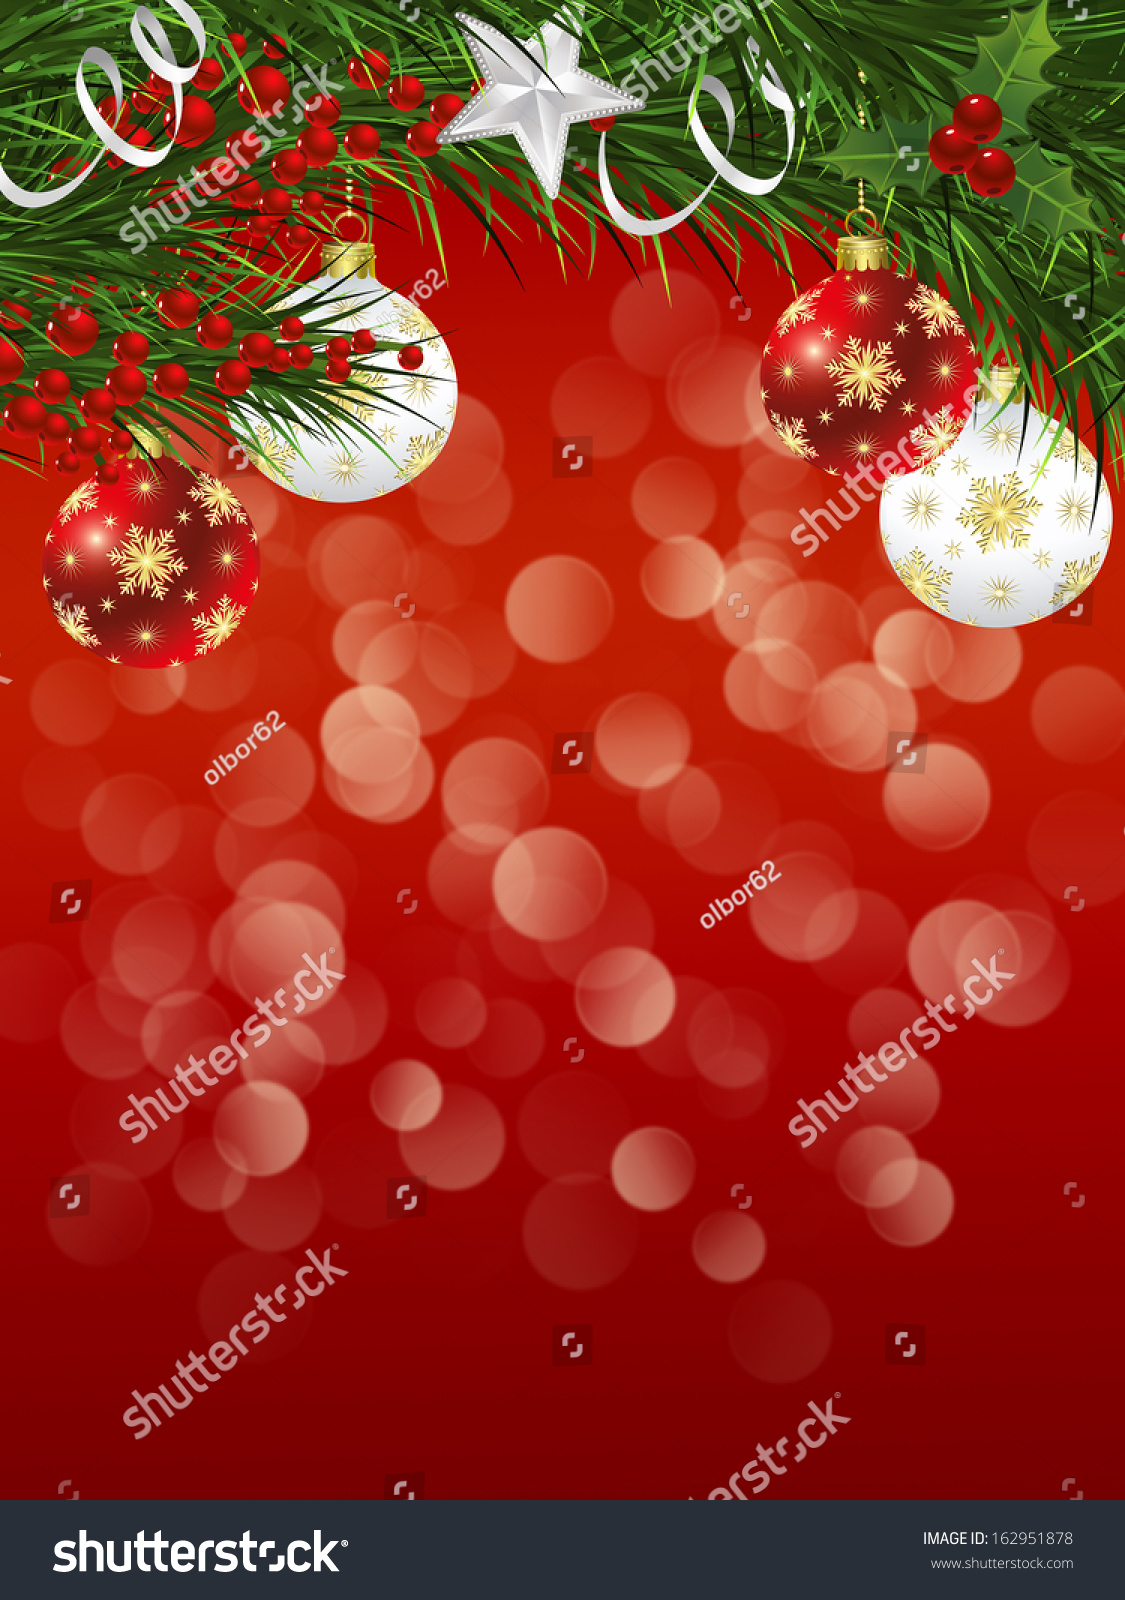 Christmas background with Christmas tree branches and decorations #162951878